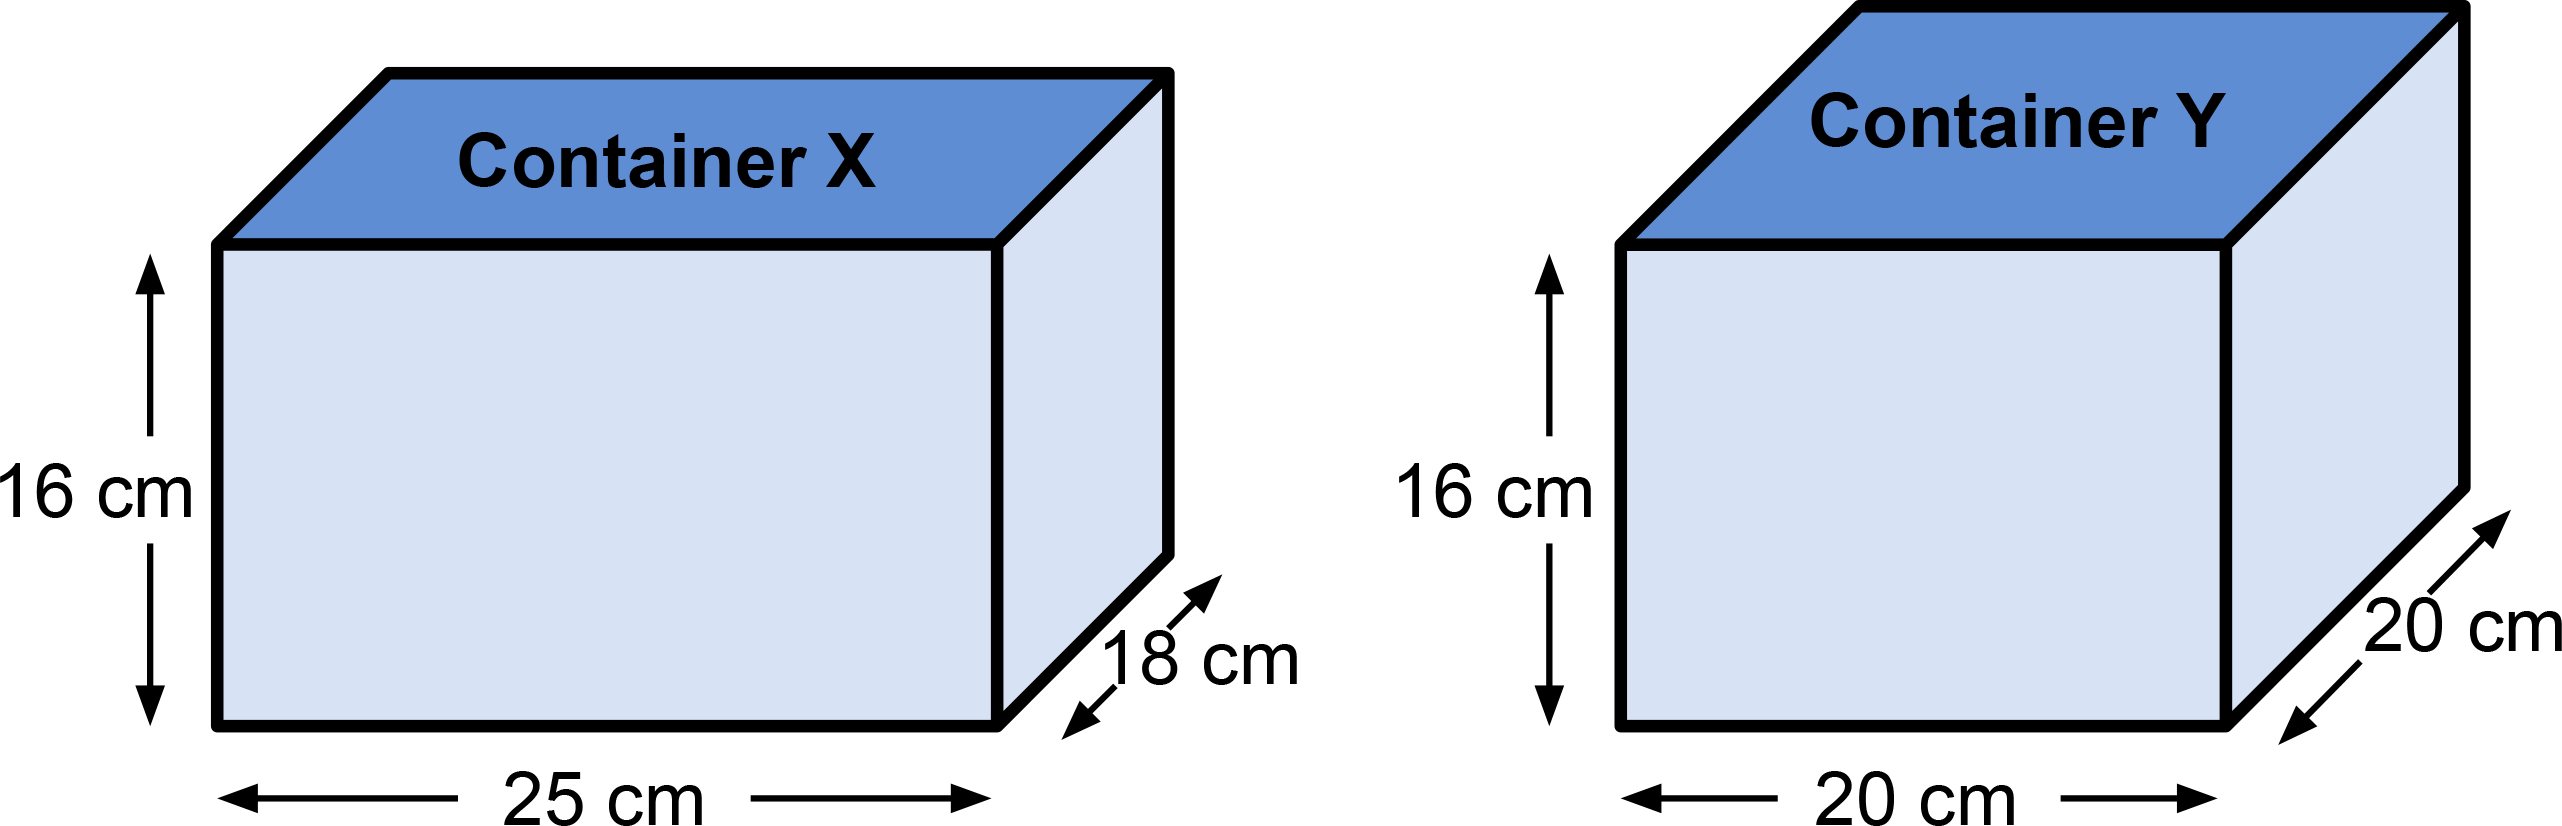 Container X is a rectangular box with length 25 centimetres, width 18 centimetres, and height 16 centimetres. Container Y is a rectangular box with length 20 centimetres, width 20 centimetres, and height 16 centimetres.